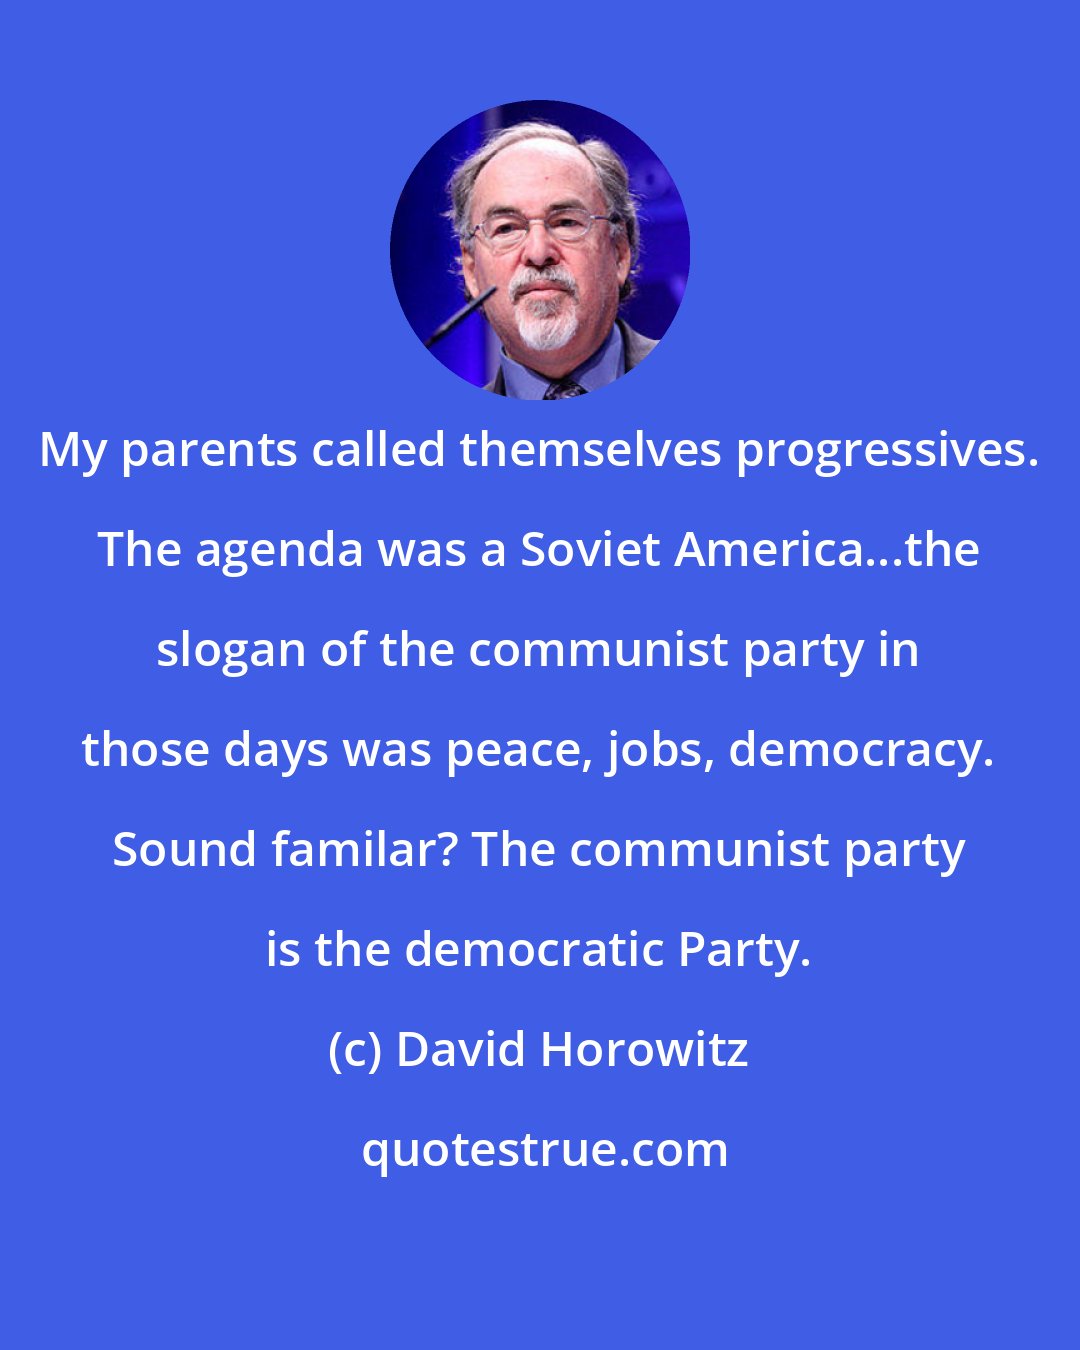 David Horowitz: My parents called themselves progressives. The agenda was a Soviet America...the slogan of the communist party in those days was peace, jobs, democracy. Sound familar? The communist party is the democratic Party.